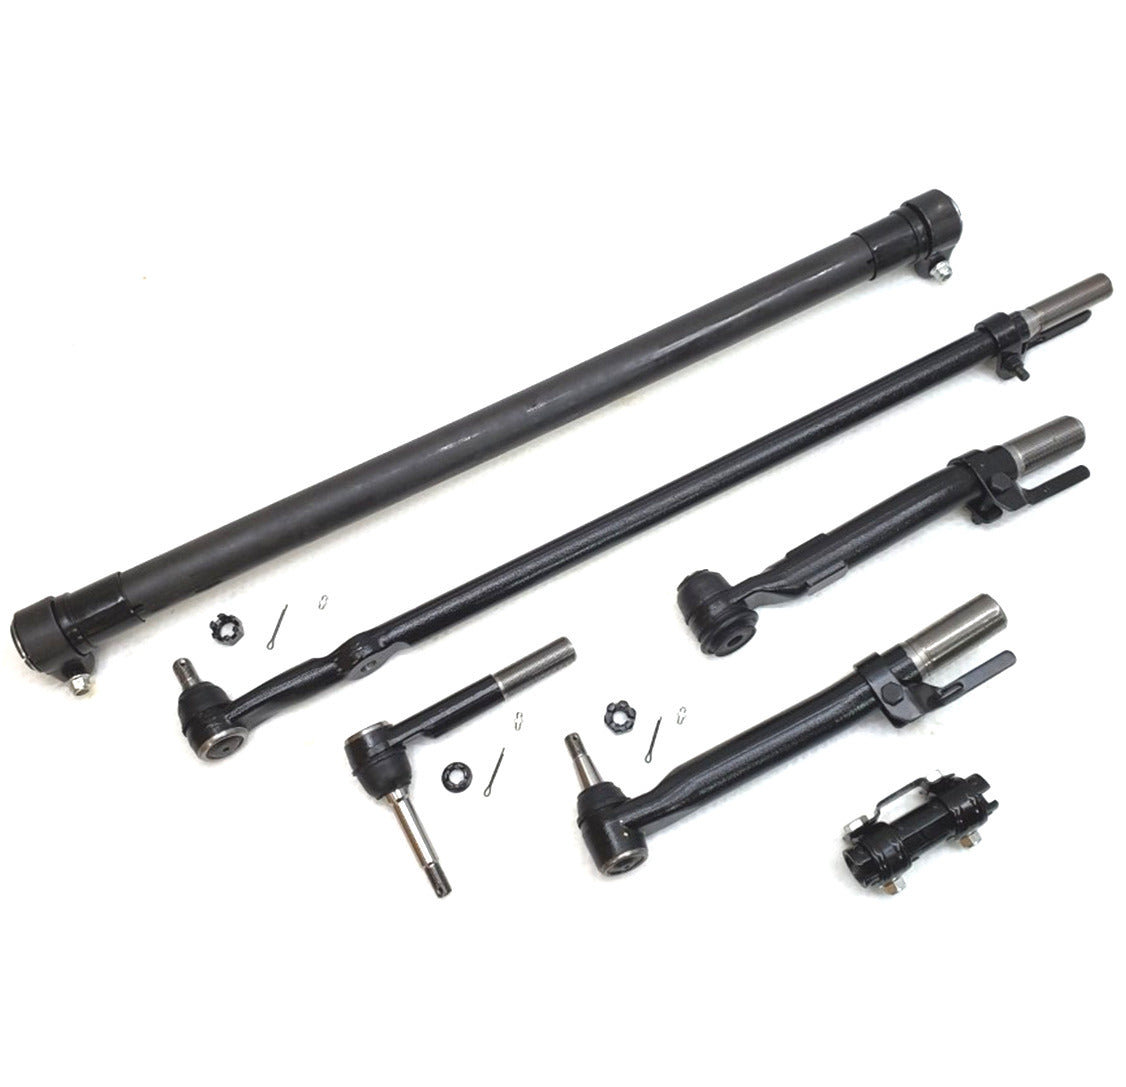 HD Drag Link Tie Rod Sleeve Steering Kit for 2008-2010 Ford F250, F350 4x4